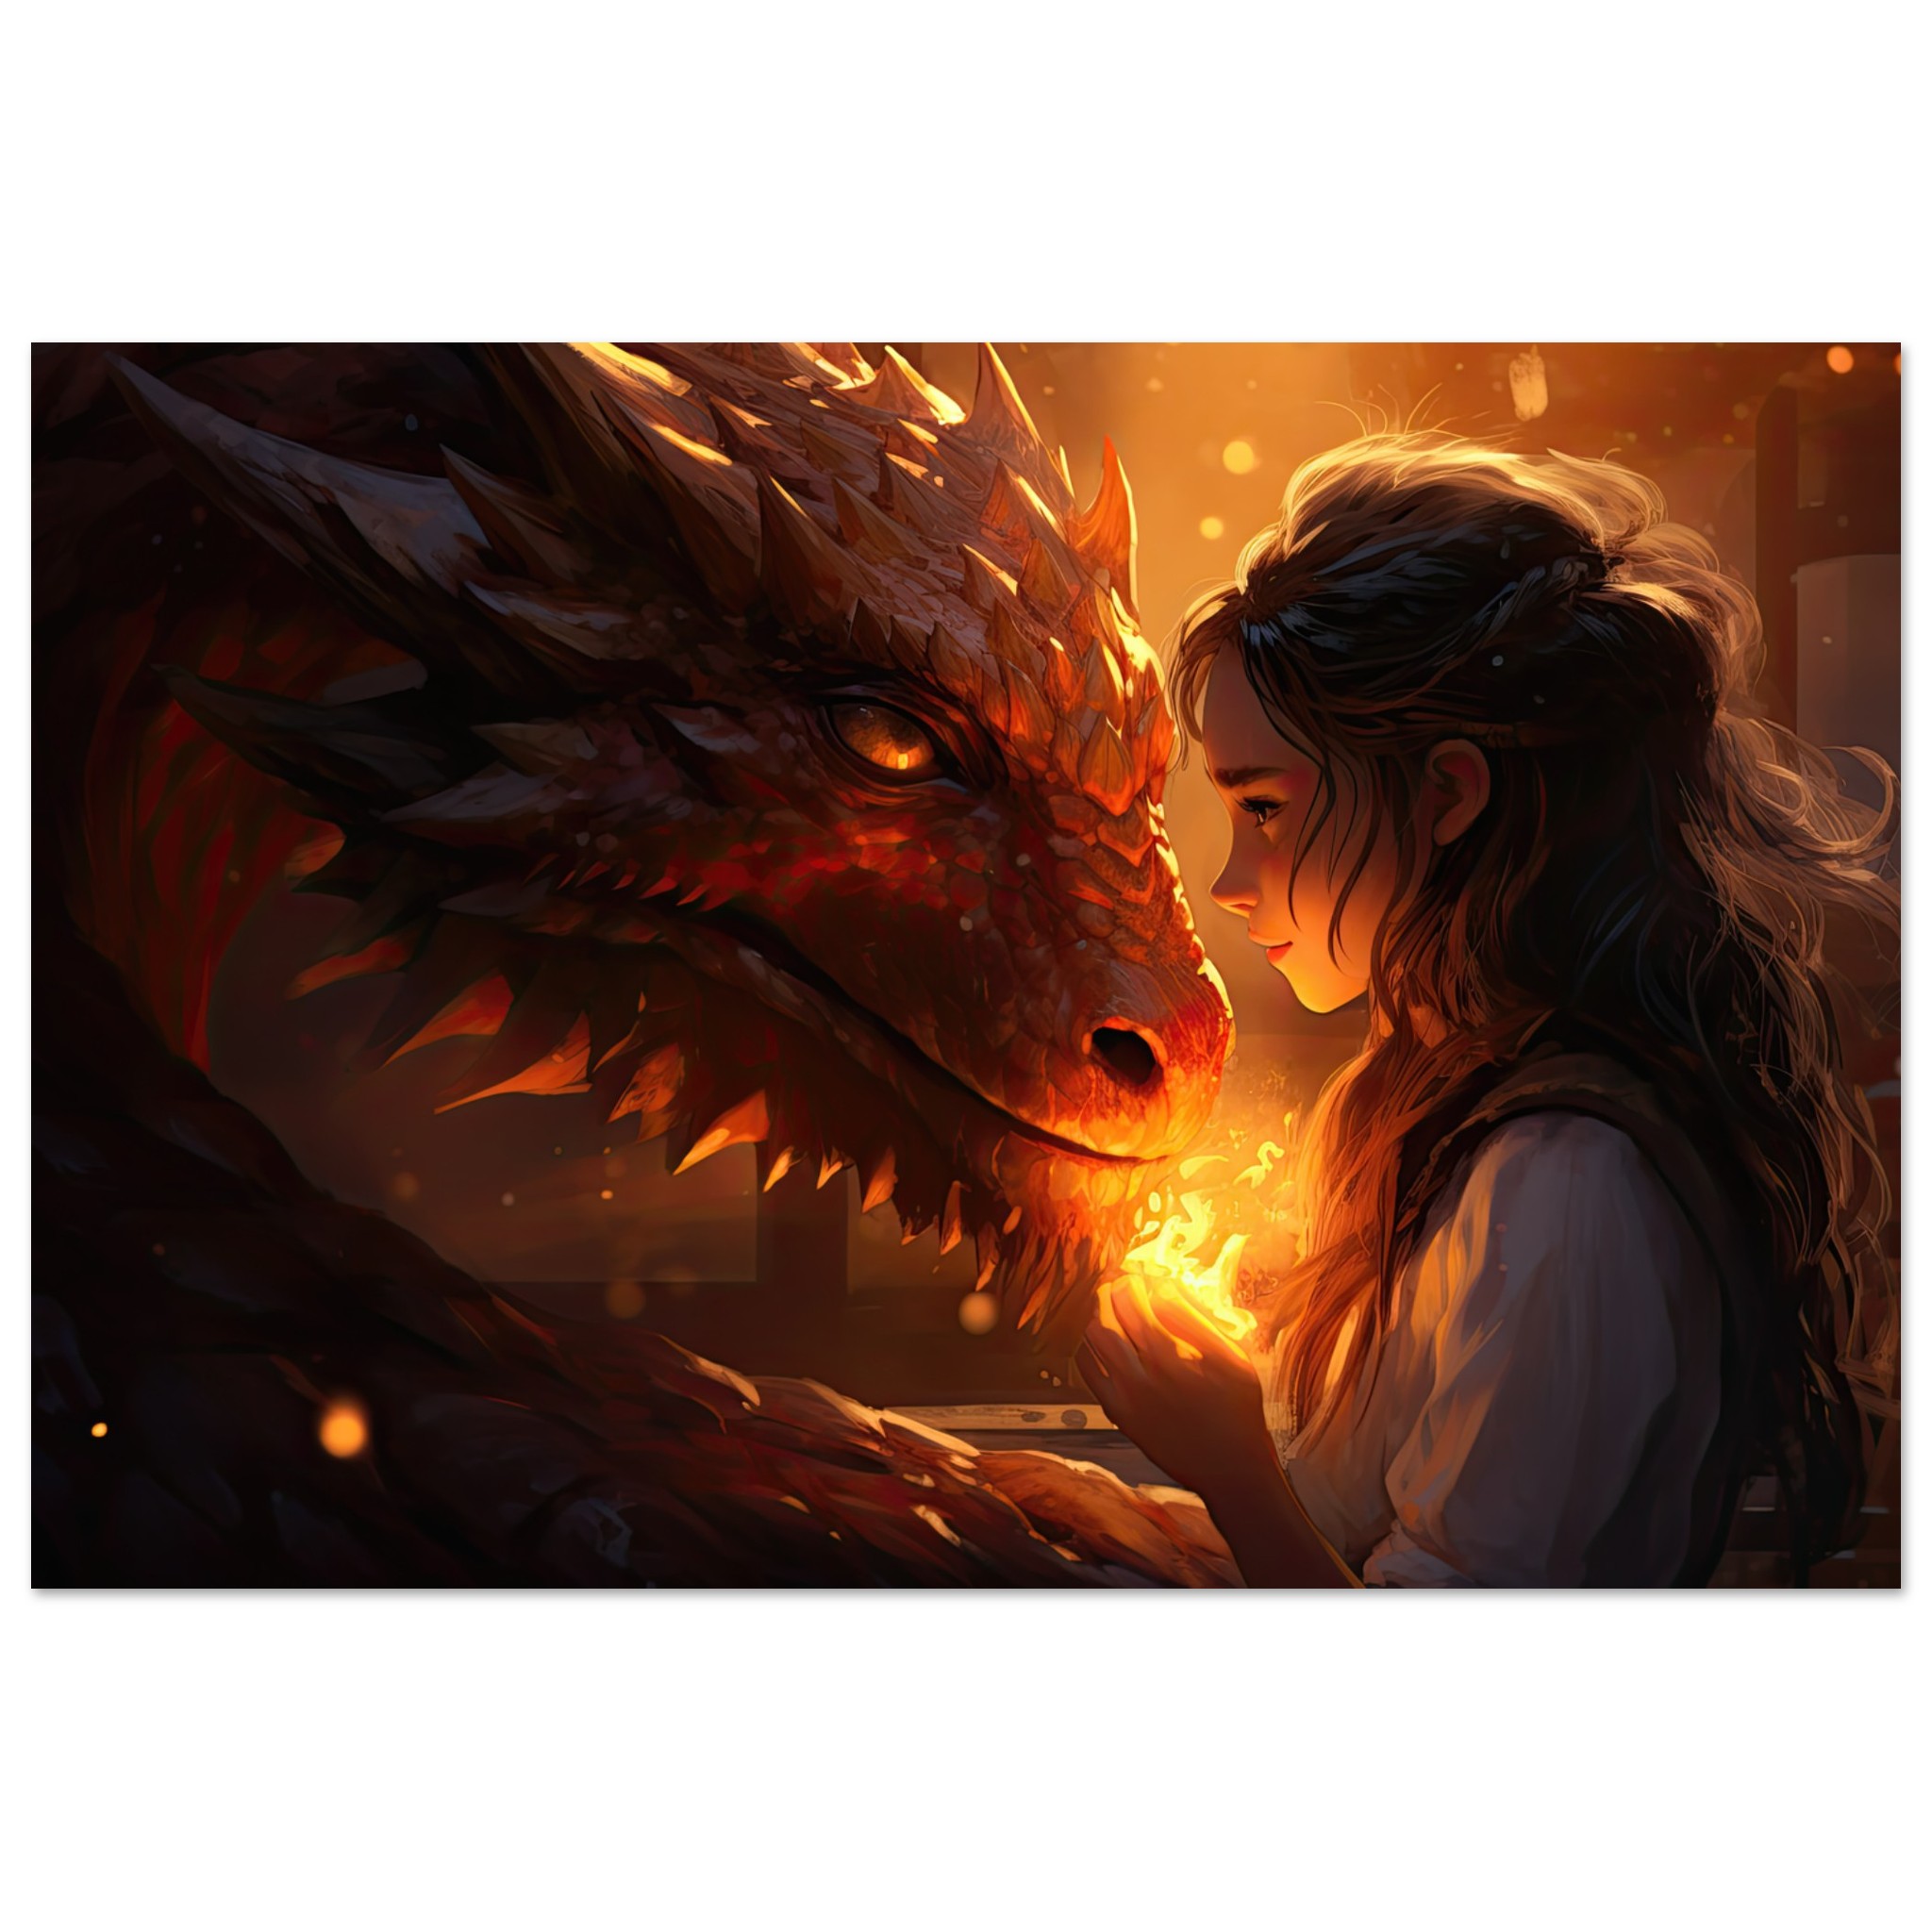 Magical Friendship - Girl and Dragon - Poster